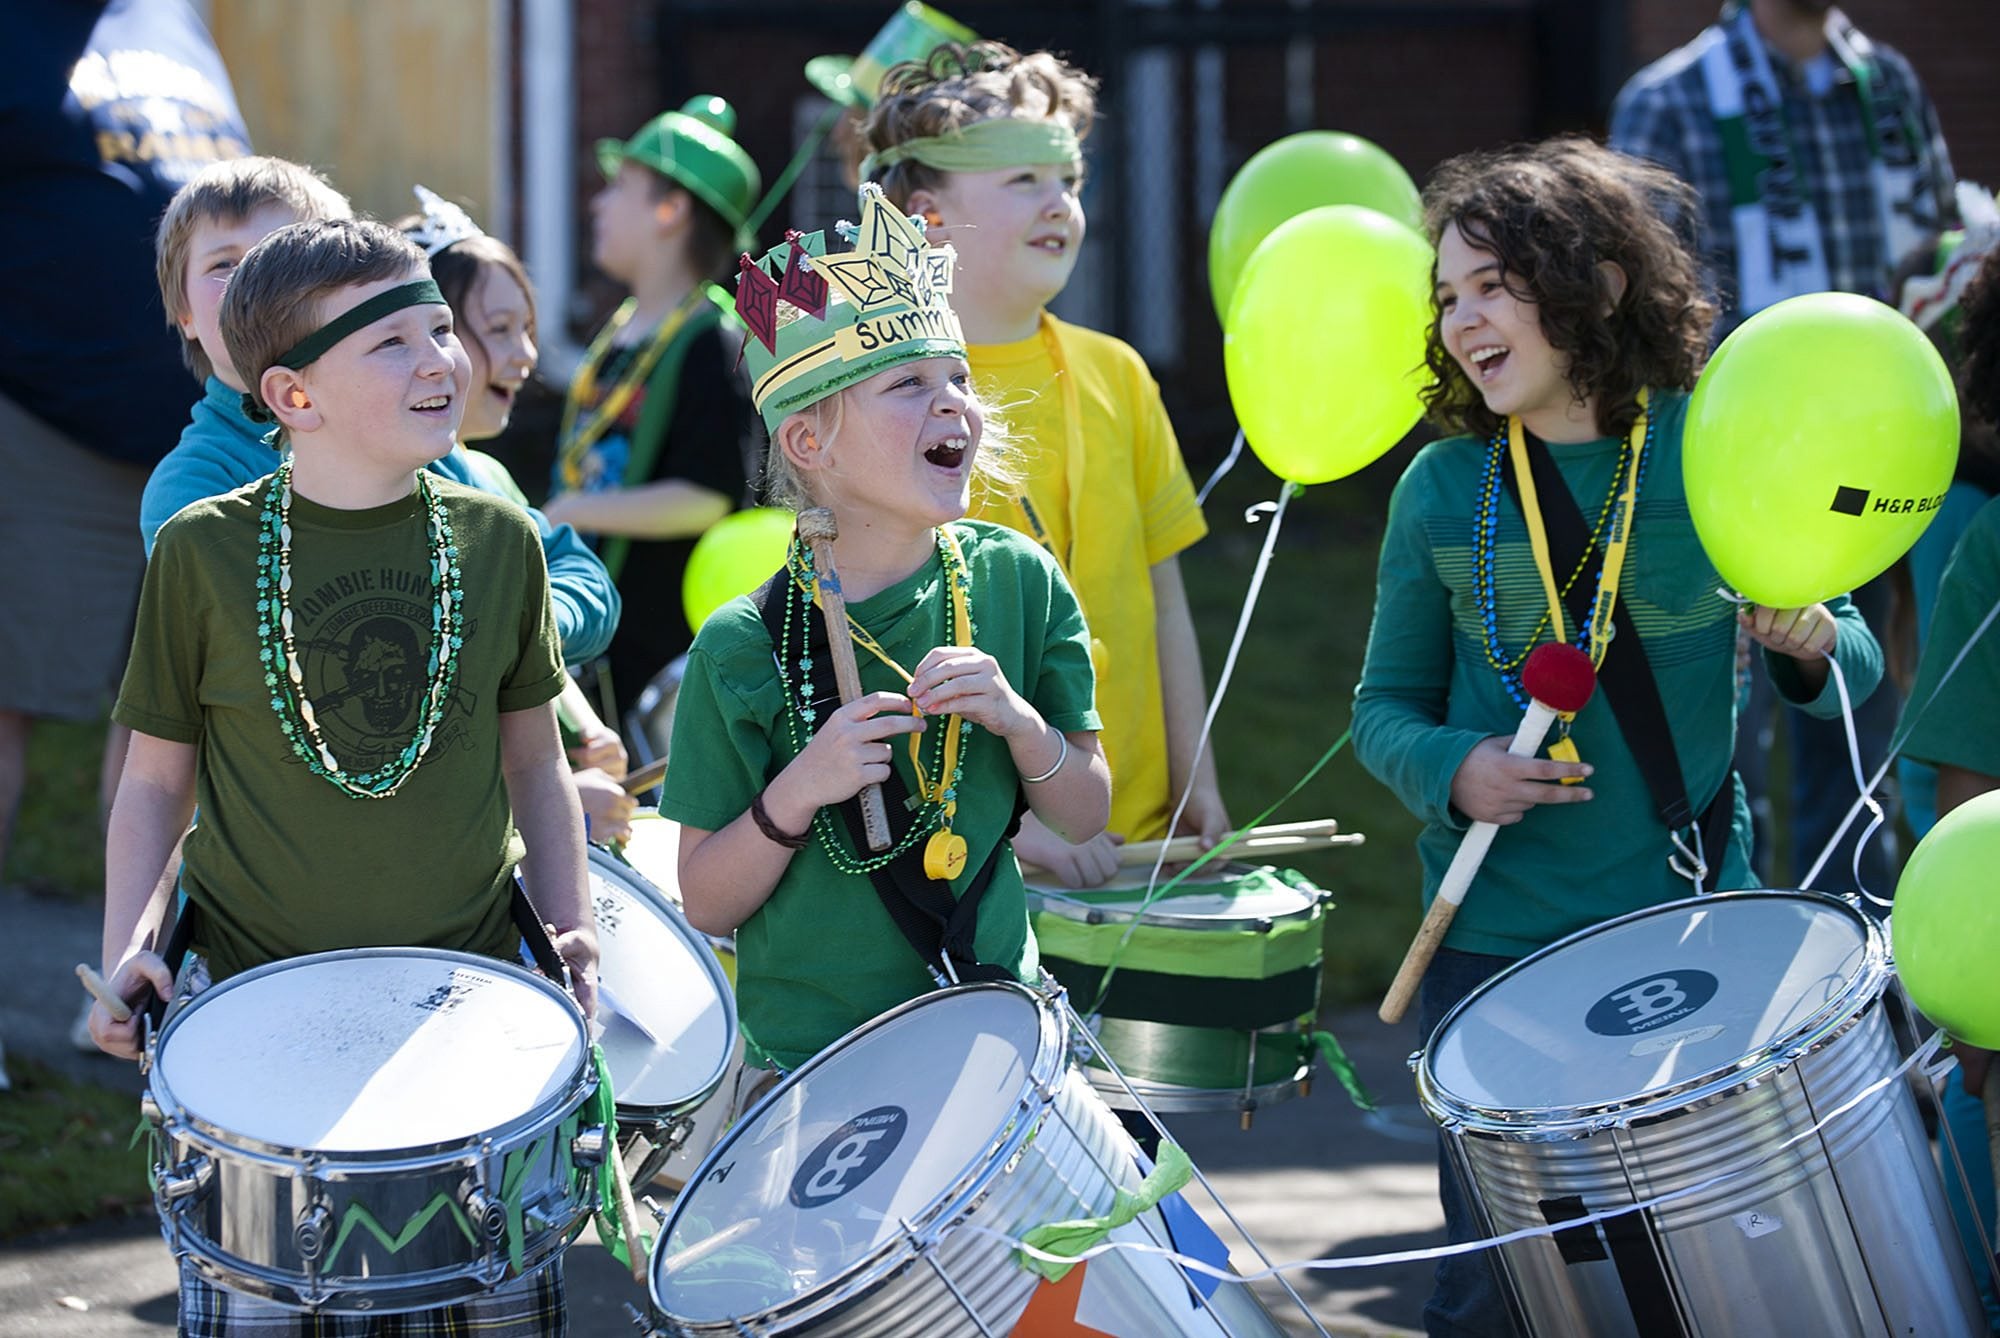 Hough Elementary School fourth-graders Spencer Smith, 9, left, and Summit Joling, 10, second from left, share a moment of joy behind the scenes with classmates as they wait for the 25th annual Paddy Hough Parade to begin Thursday in the Hough neighborhood.